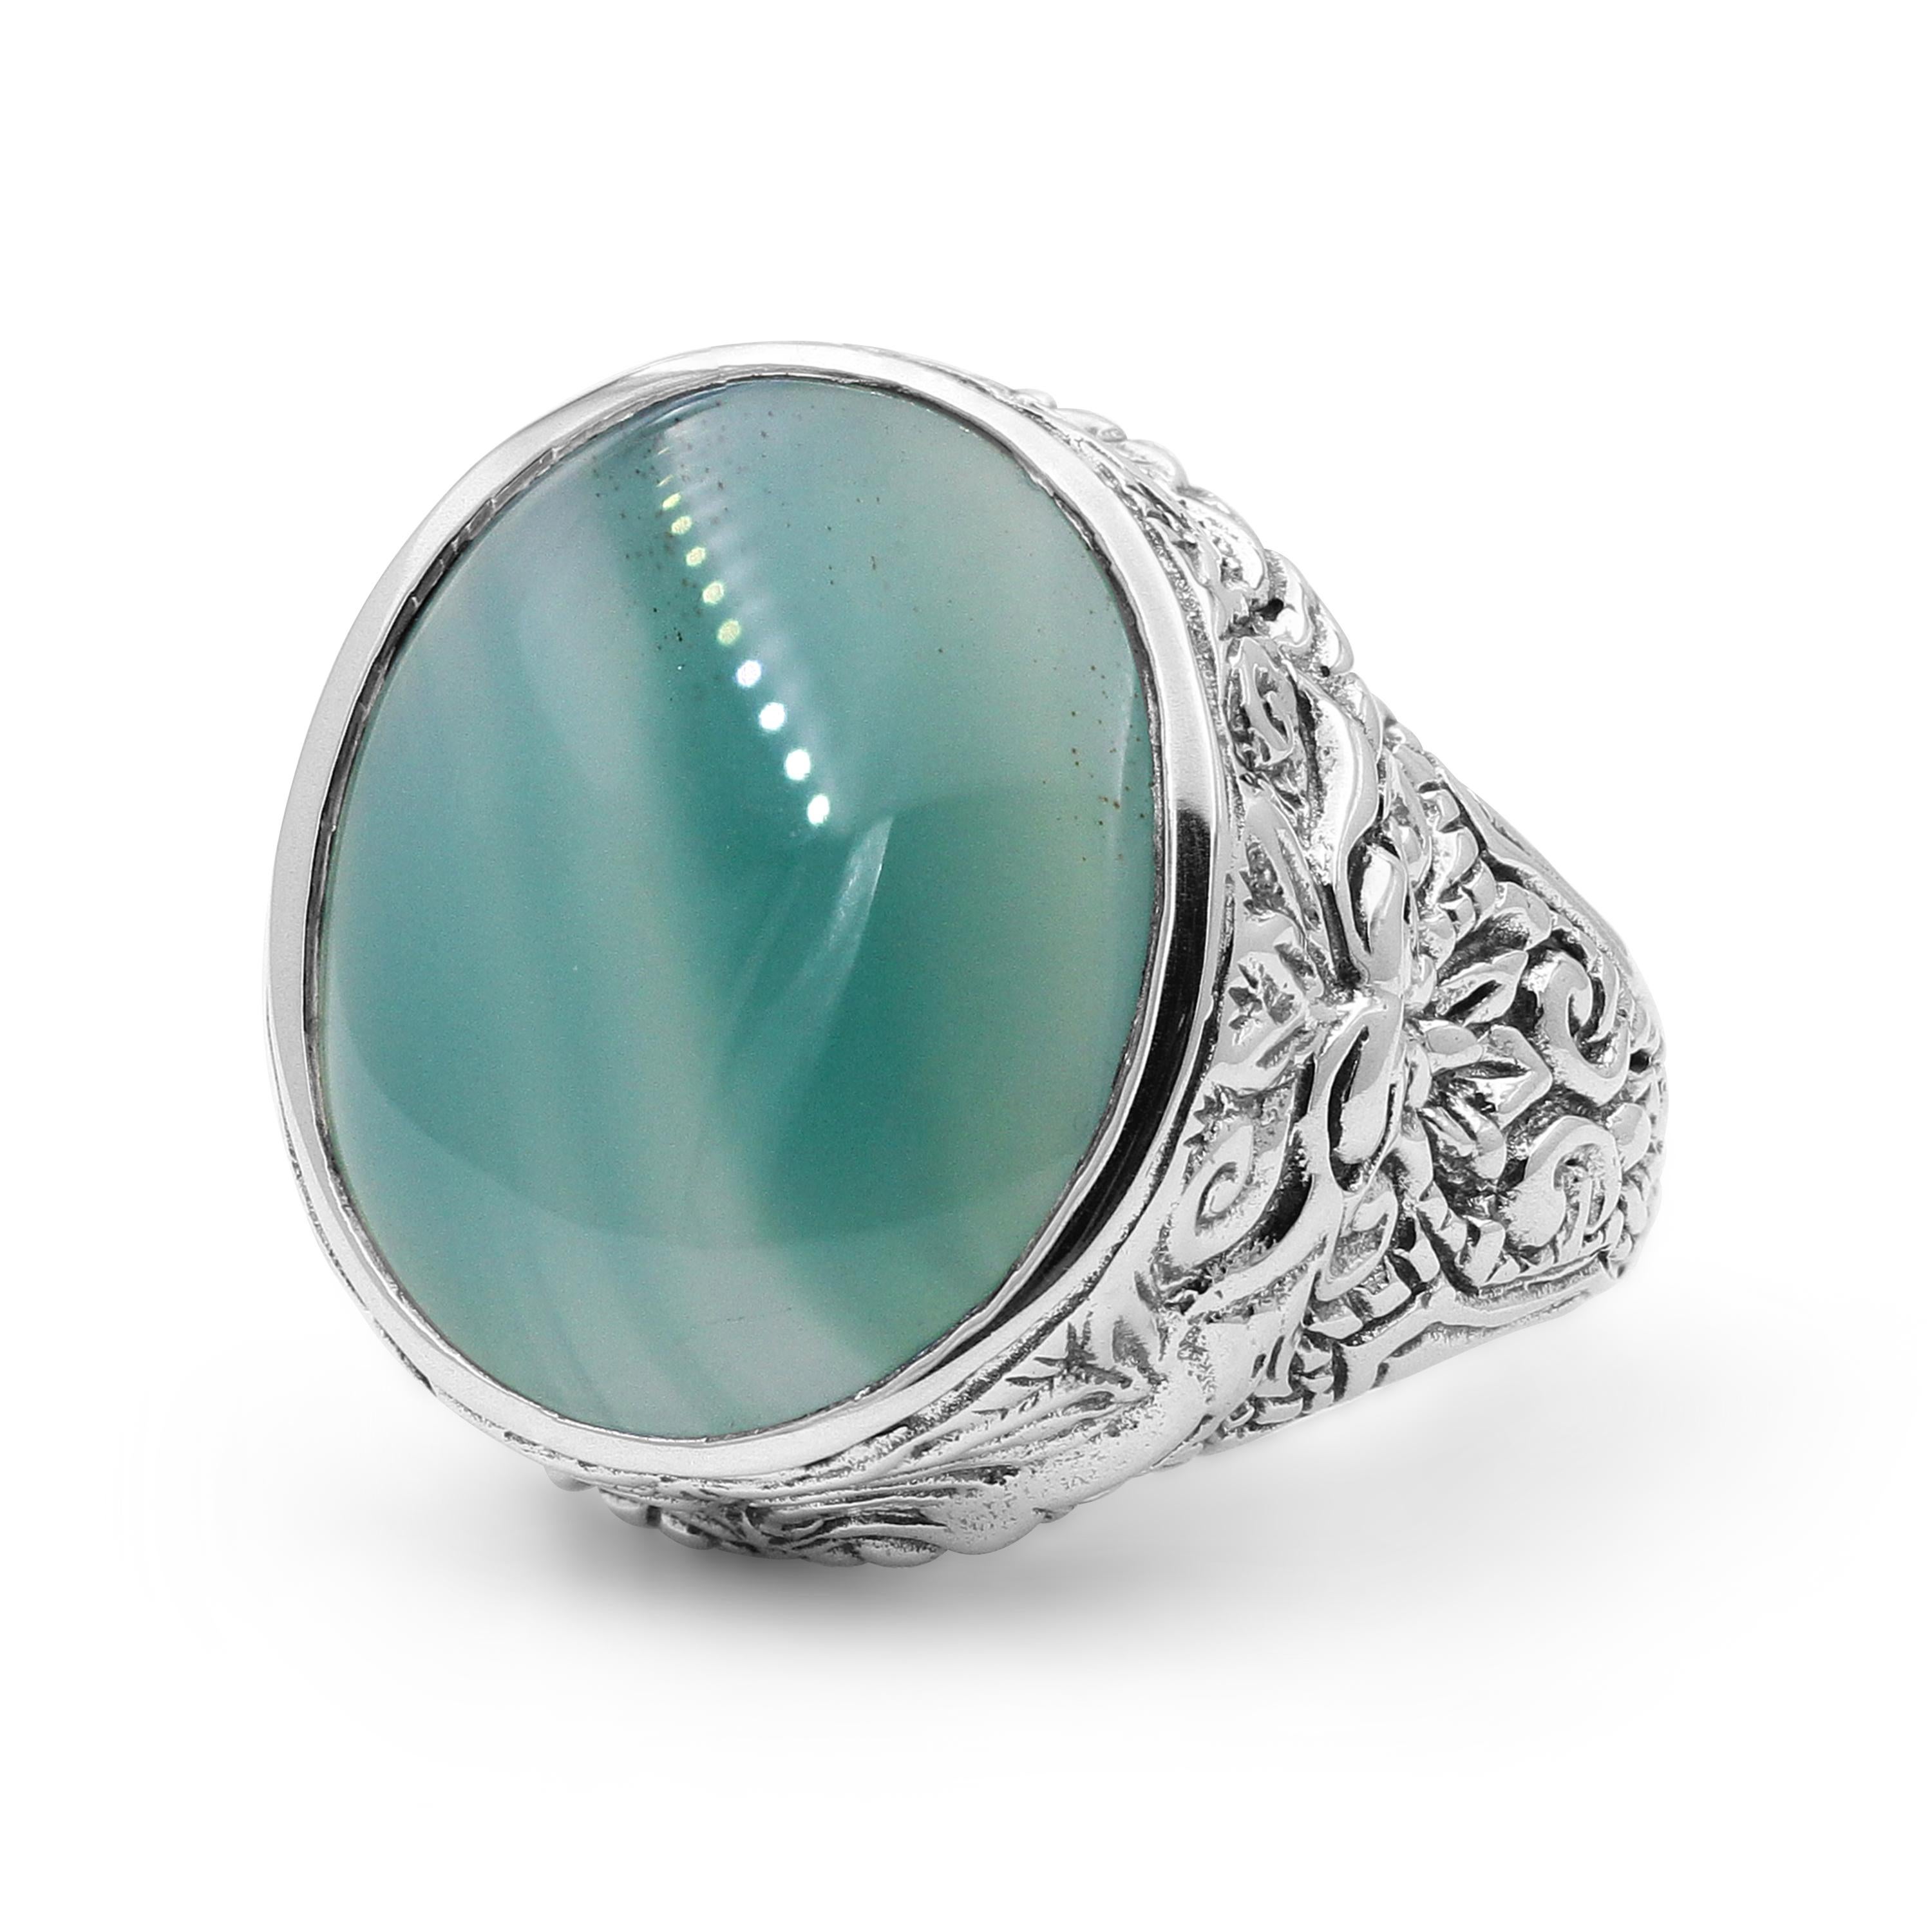 This beautiful Stephen Dweck Sterling Silver Signet Ring features a smooth Agate gemstone (16mm x 20mm) flattered with luscious carvings of sterling silver. Drawing inspiration from a love of nature and passion for art, each Stephen Dweck creation